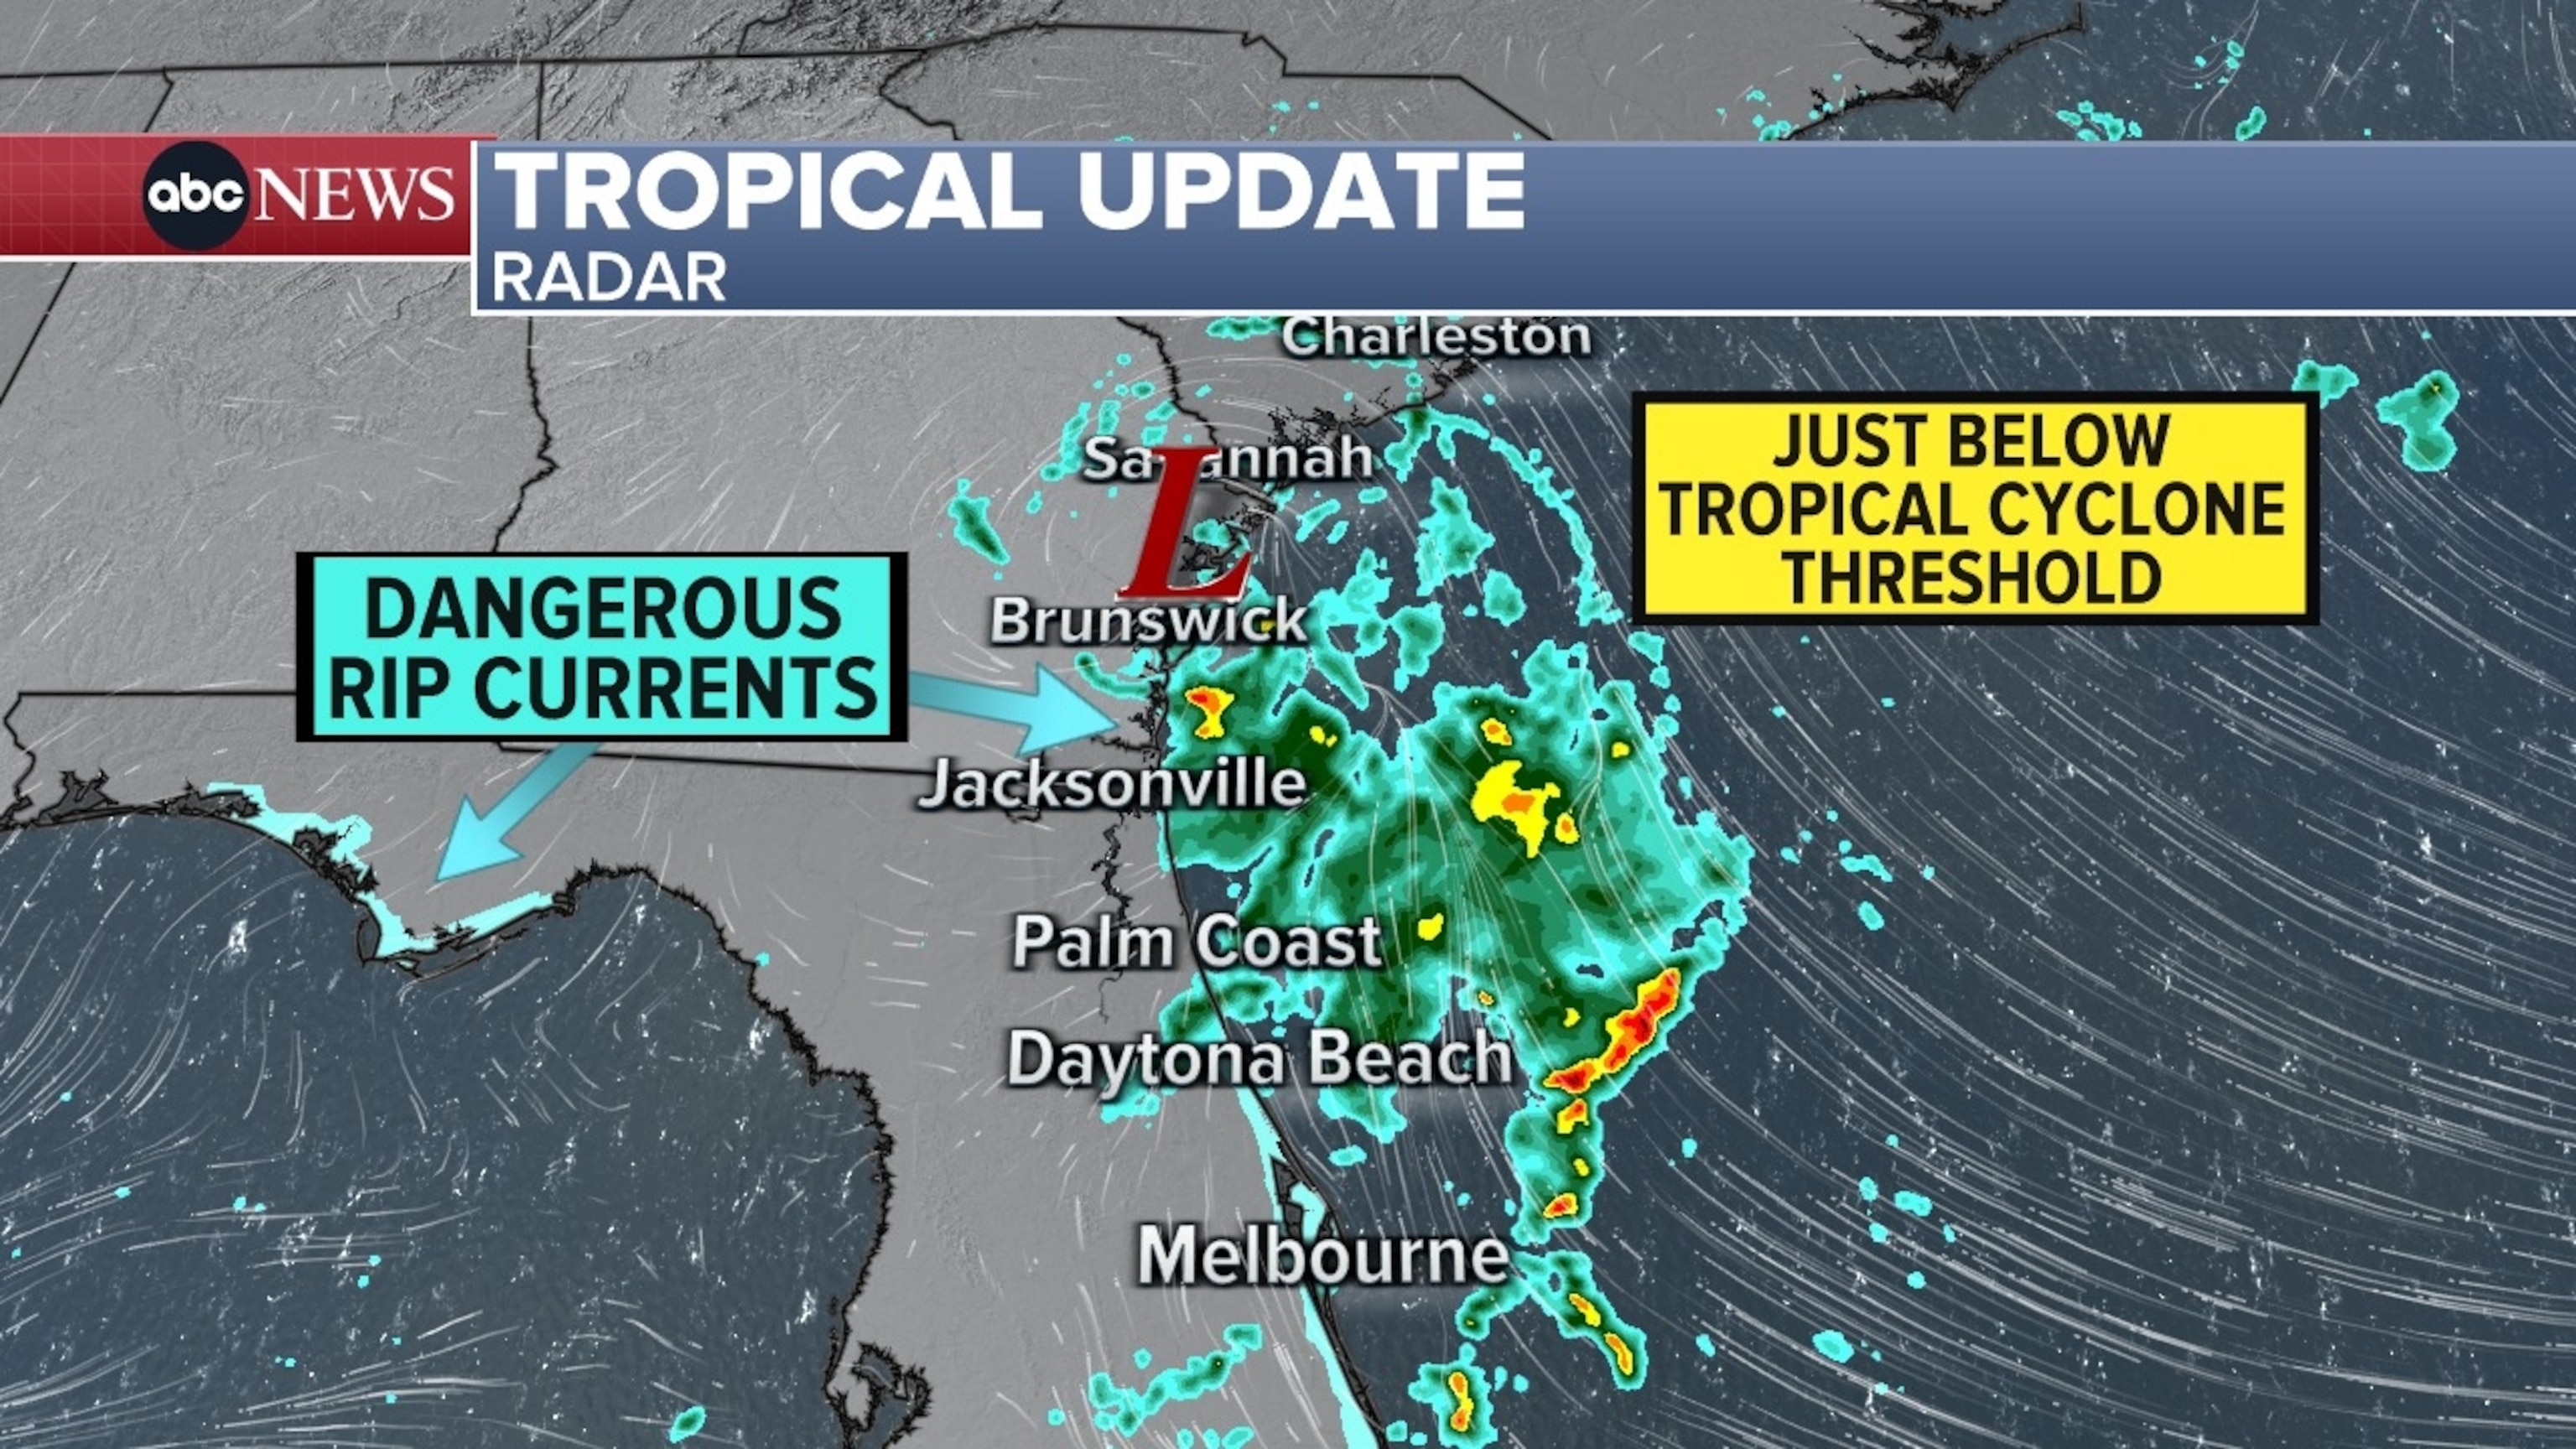 PHOTO: Tropical Update weather graphic